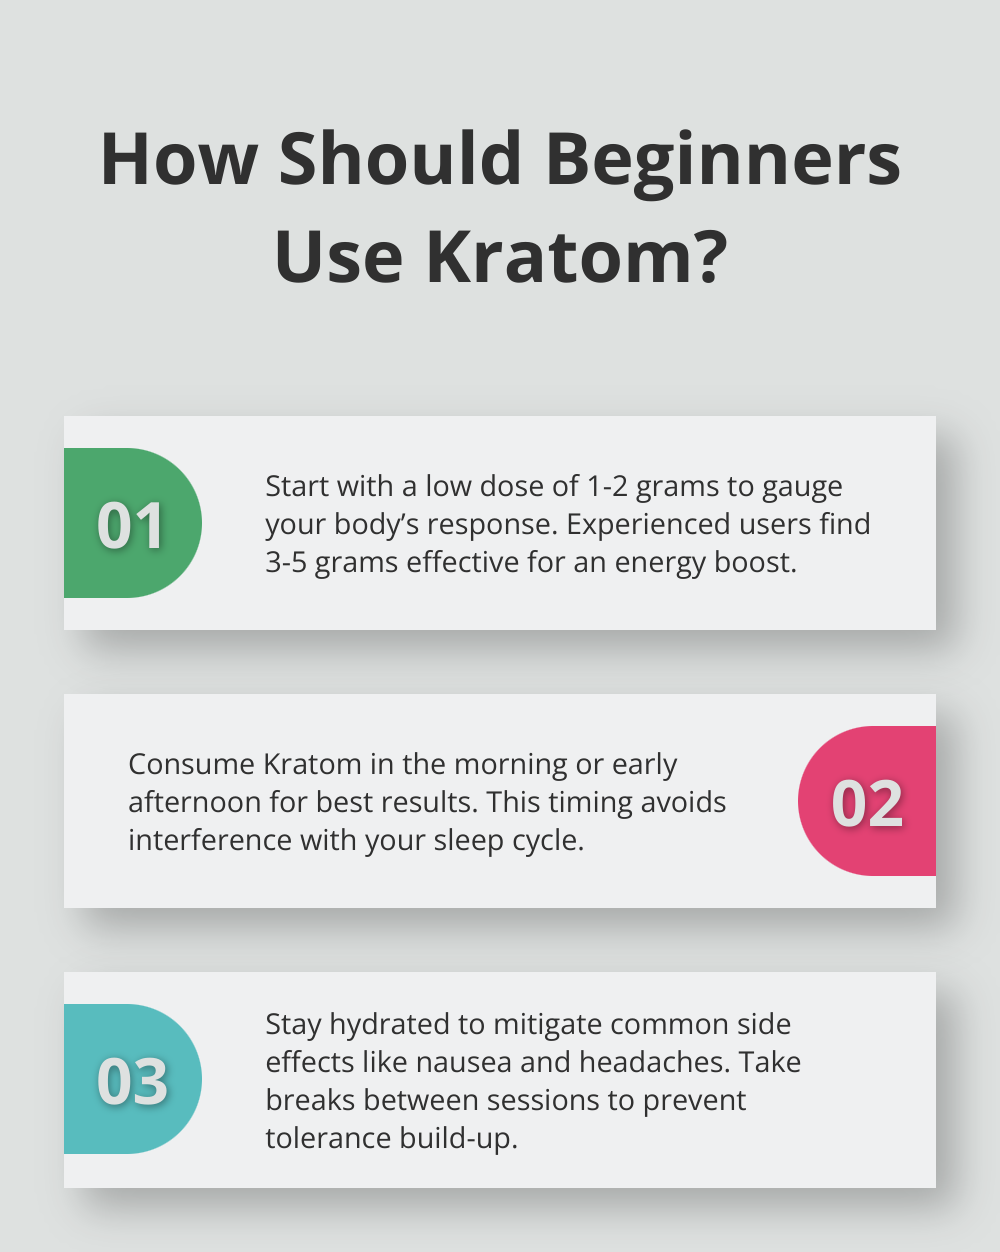 Fact - How Should Beginners Use Kratom?